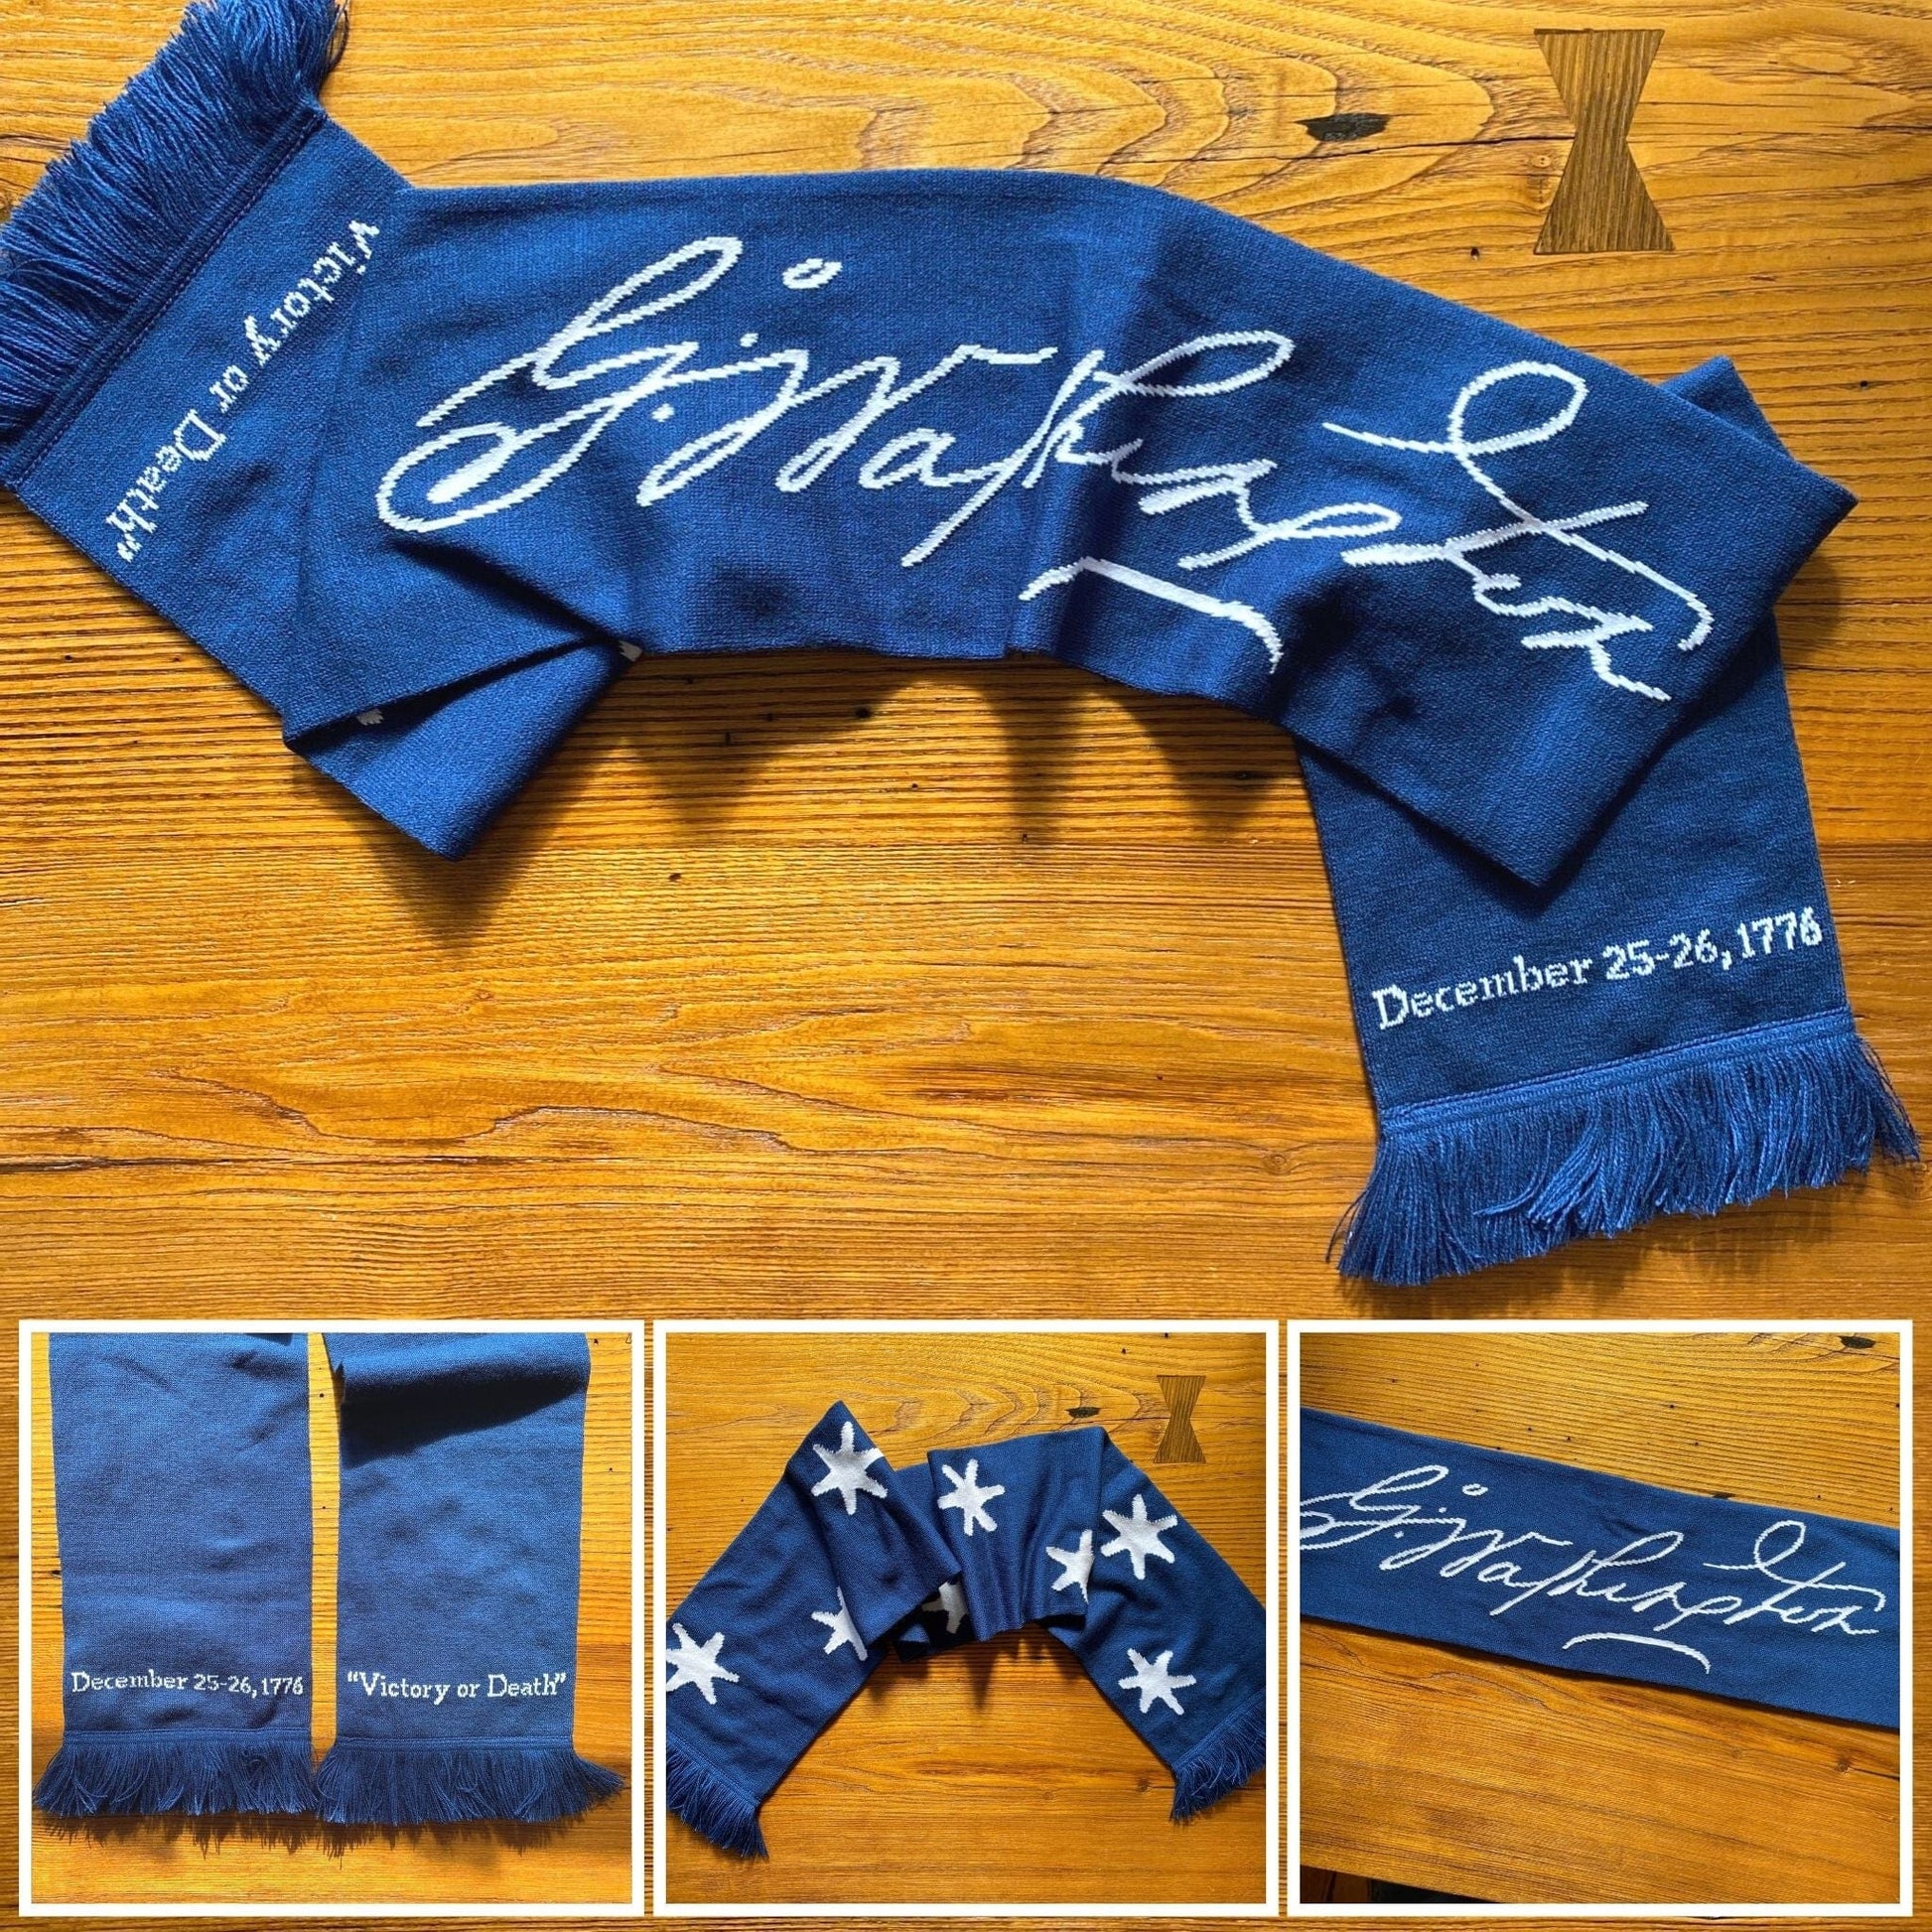 George Washington Signature "Victory or Death" woven scarf from the history list store